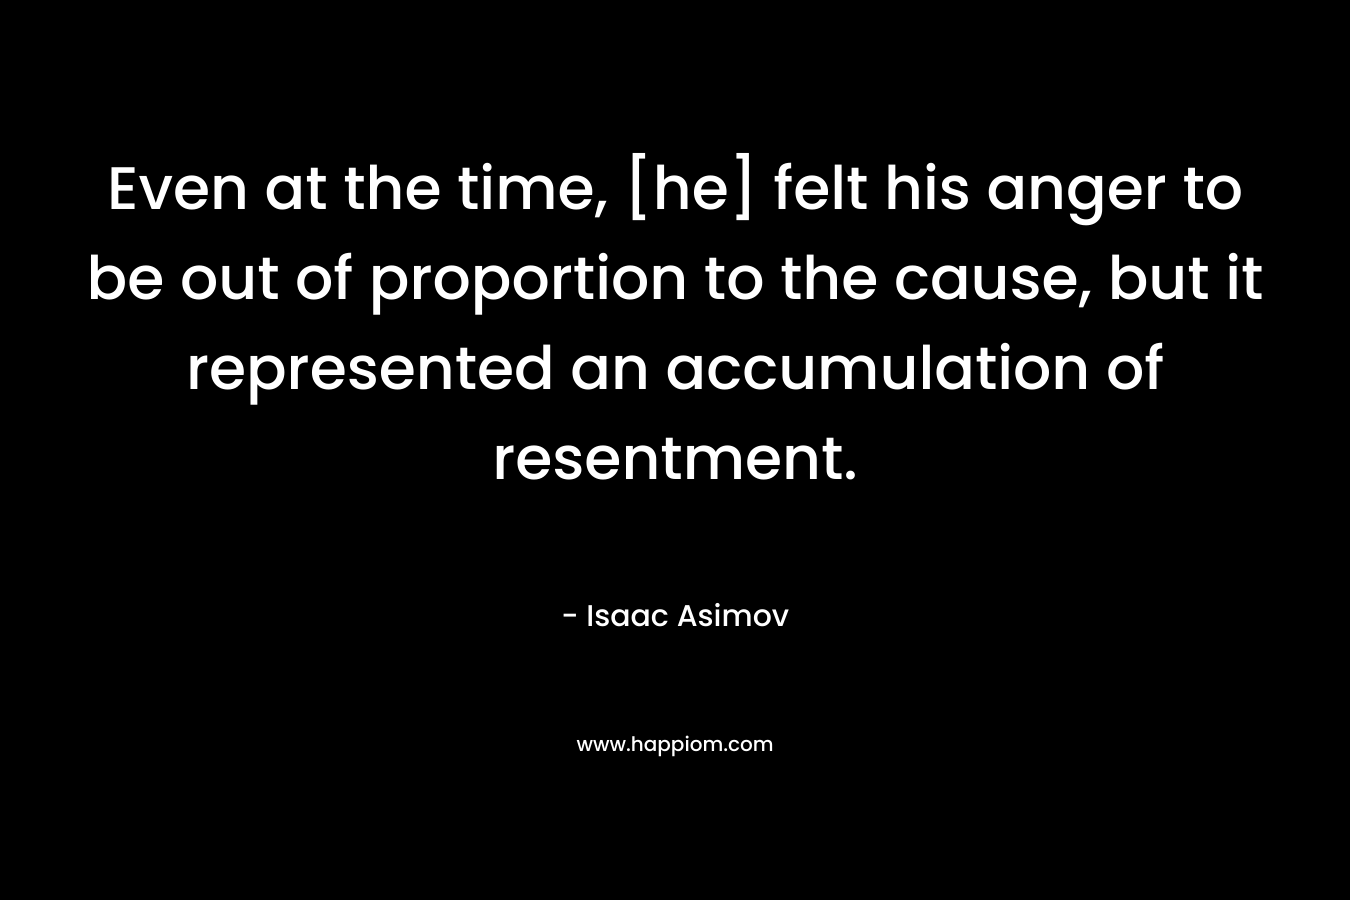 Even at the time, [he] felt his anger to be out of proportion to the cause, but it represented an accumulation of resentment.